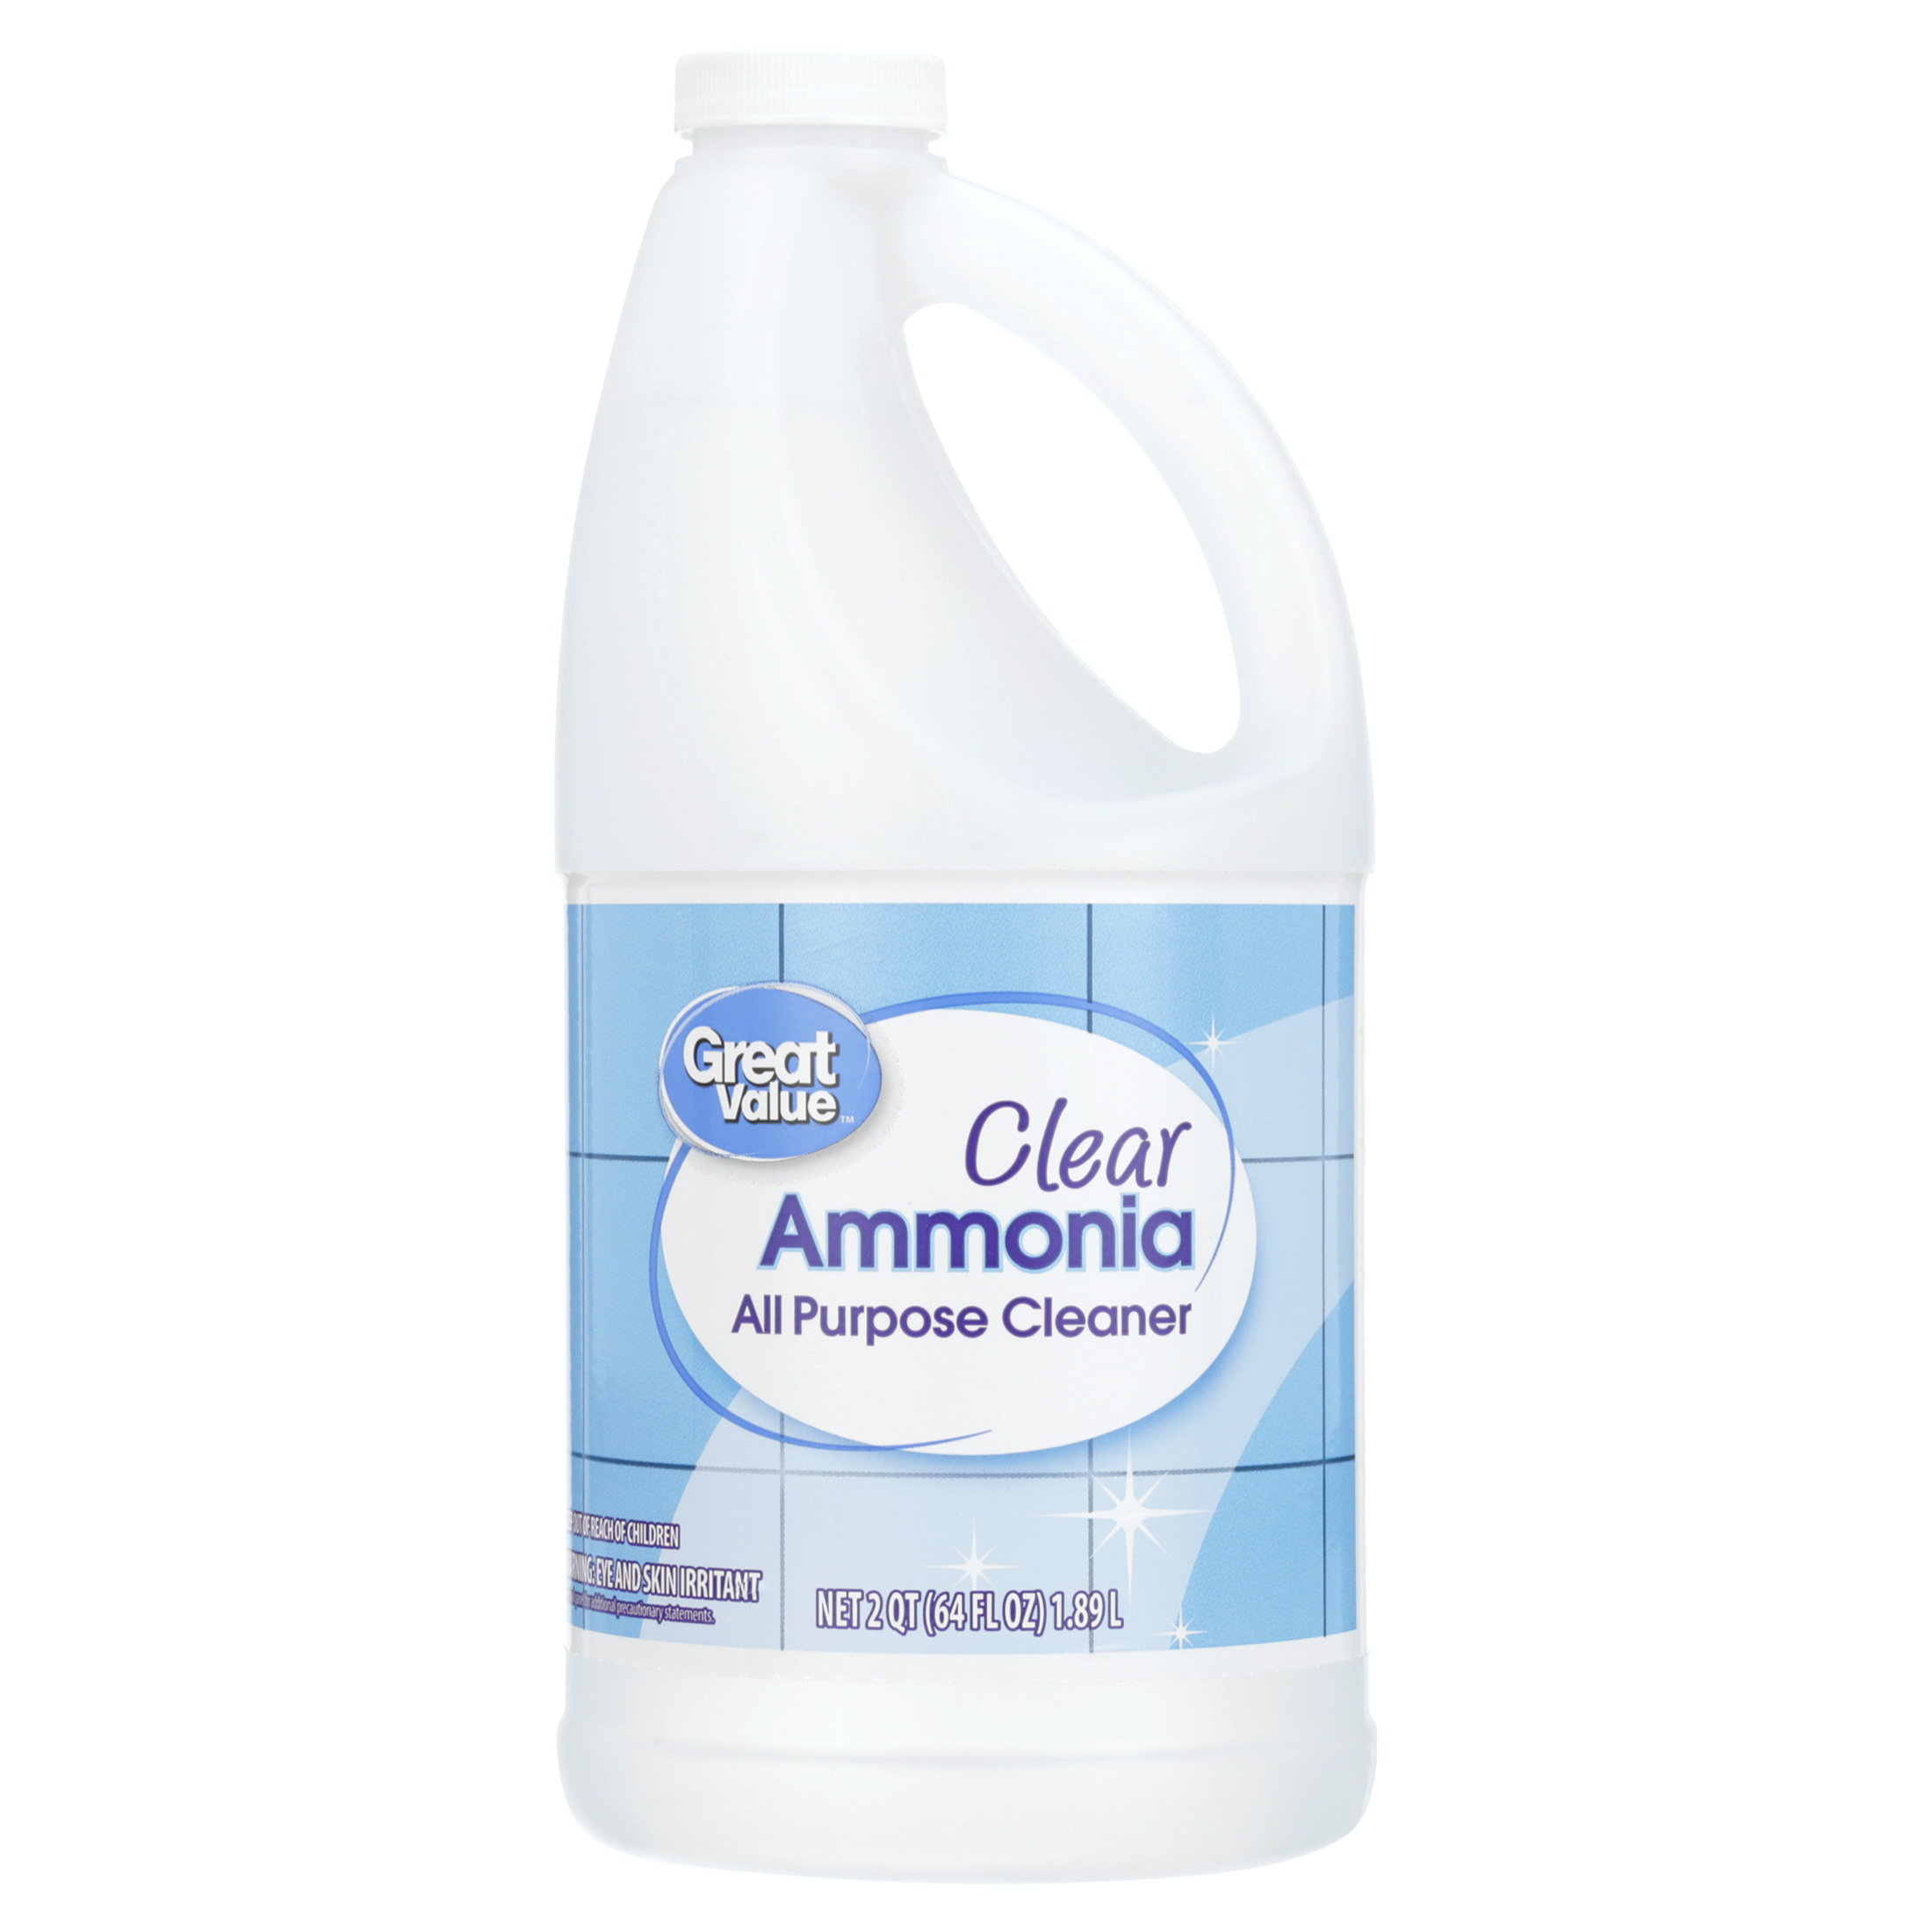 Great Value Clear Ammonia All-Purpose Cleaners, 64 fl oz - image 1 of 7